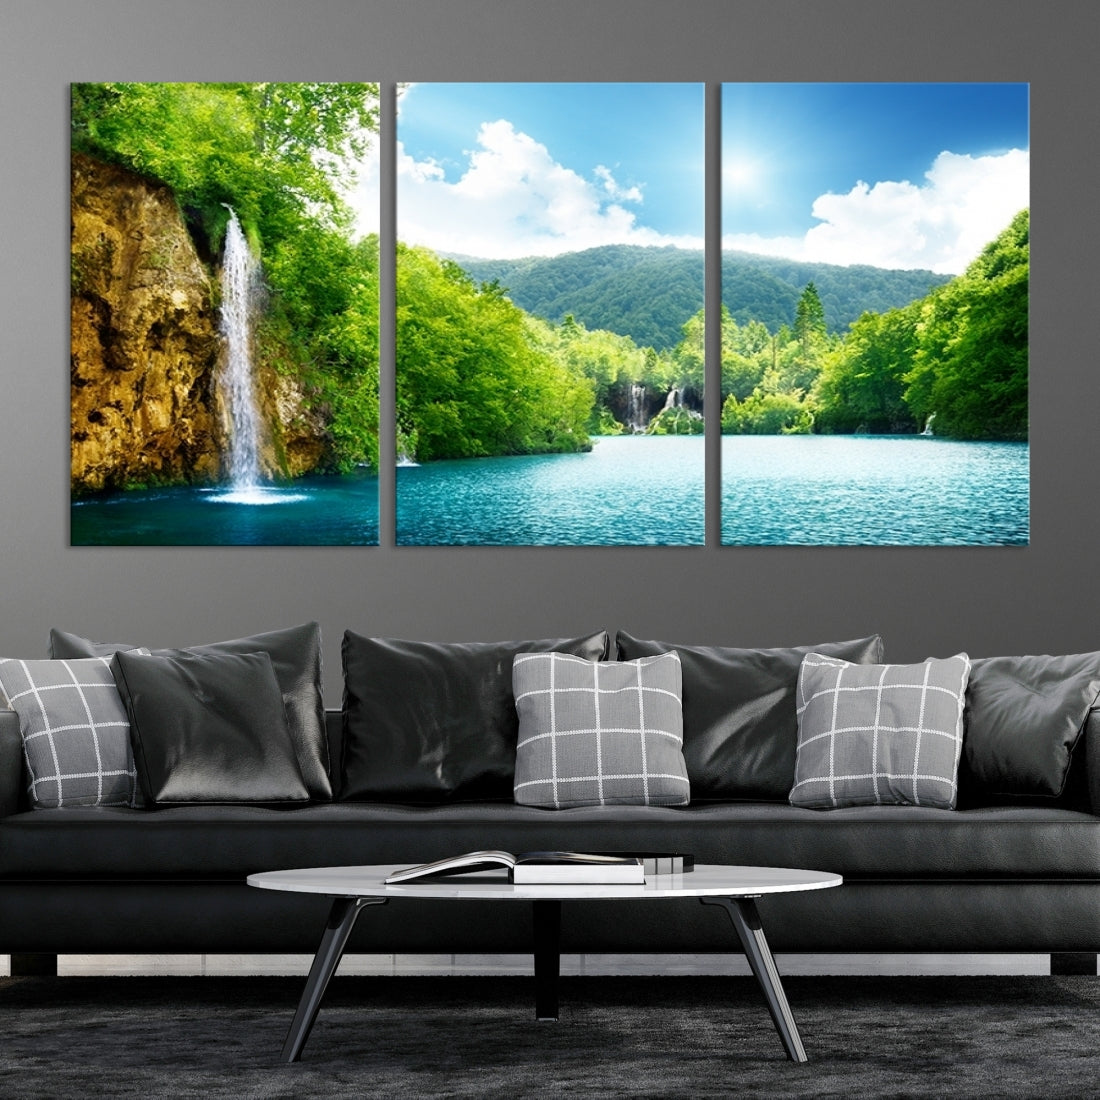 Large Wall Art Waterfall Canvas Print - Big Waterfalls in Forest with Mountain View